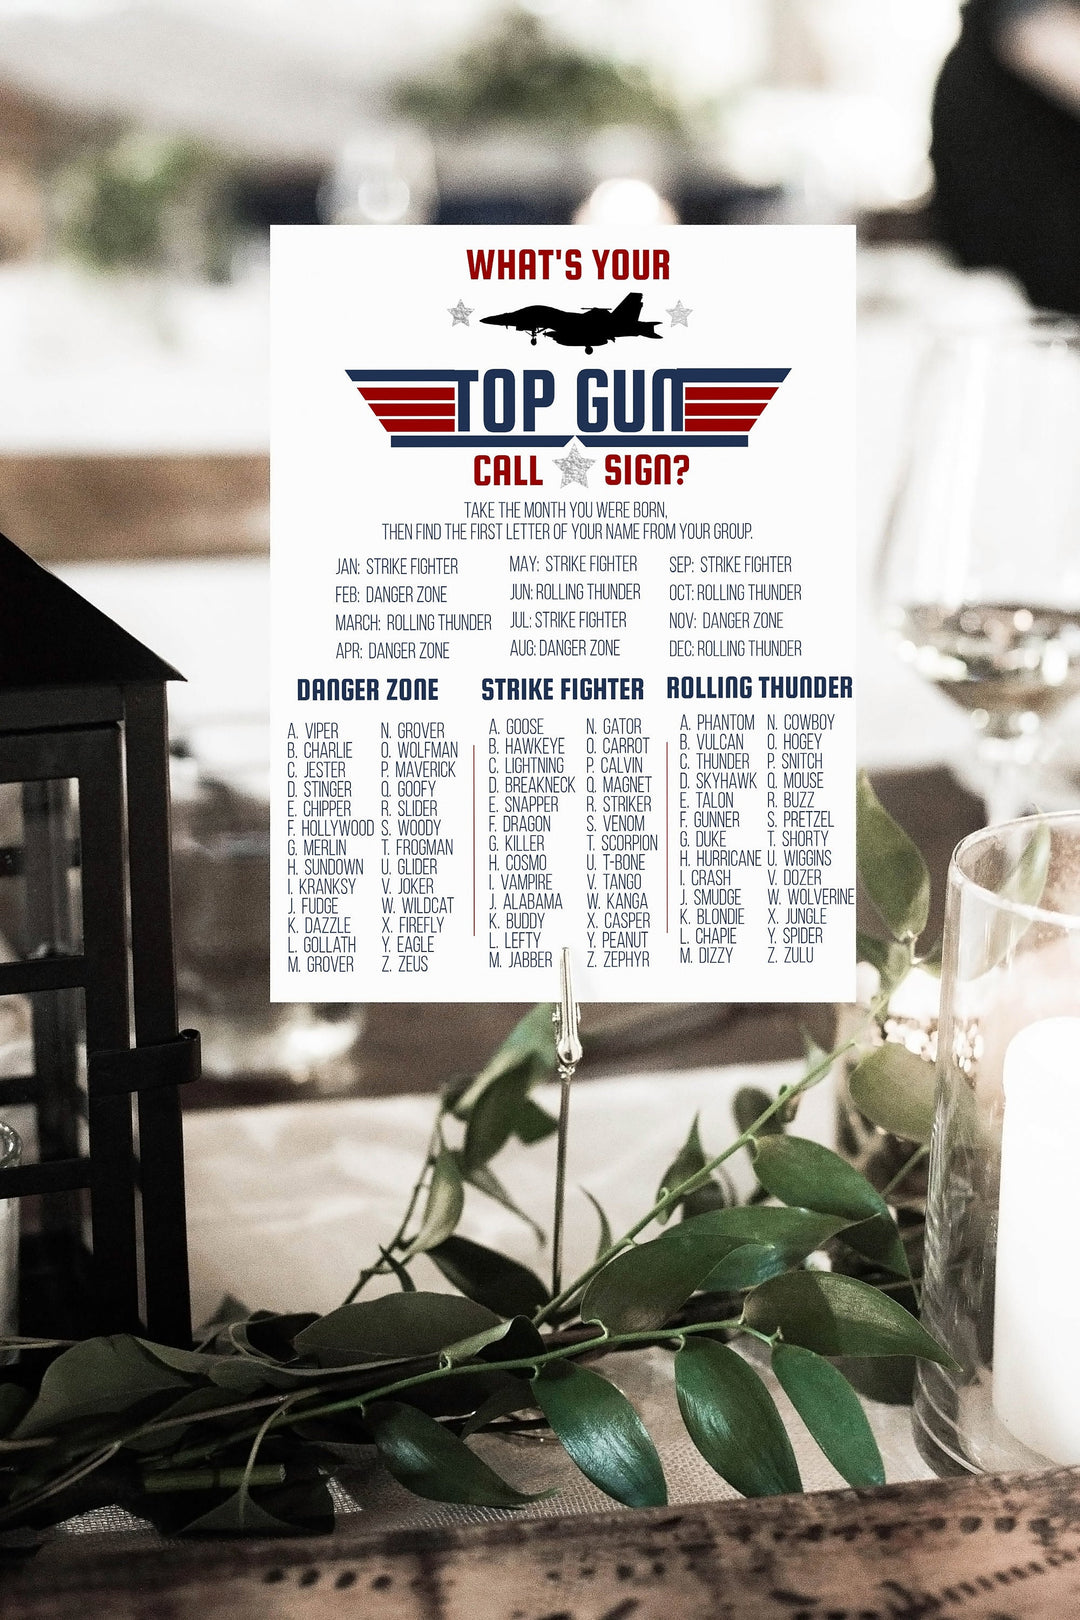 Top Gun Birthday Party Game - Whats Your Top Gun Call Sign Game - Fighter Pilot Birthday Game - Air Force Birthday Invitation Game - War Jet